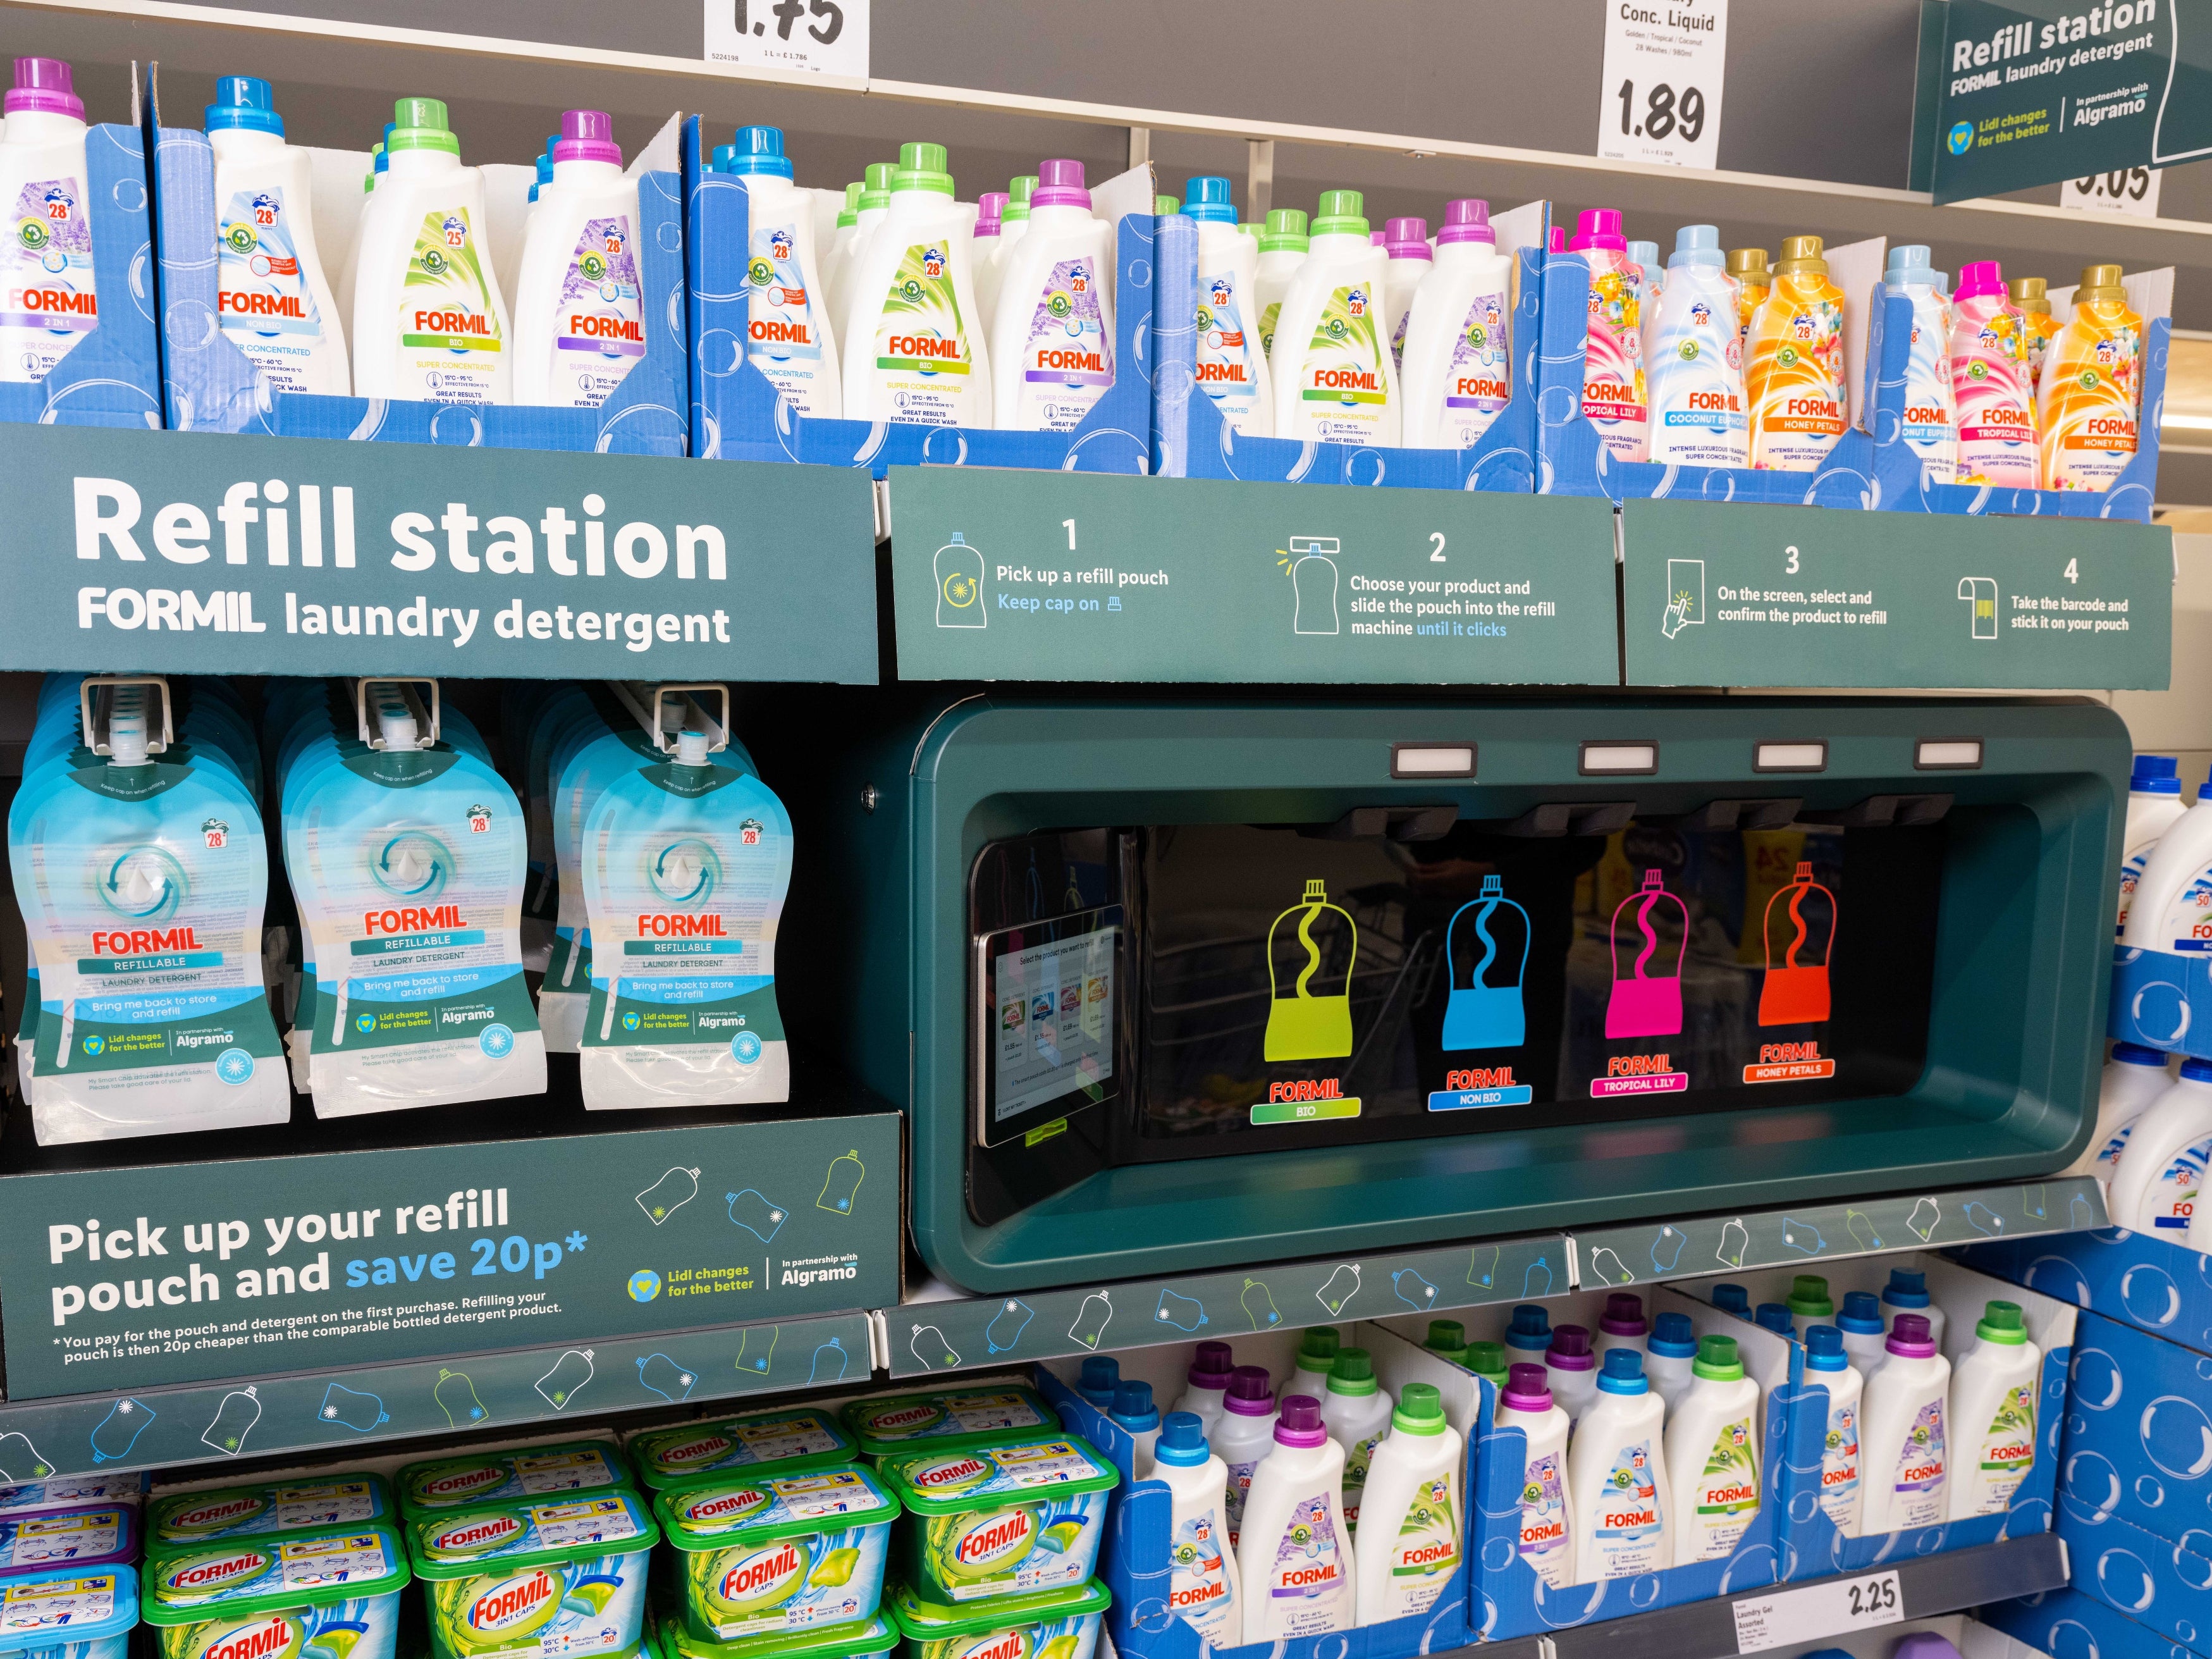 The refill stations will sit next to the single-use laundry detergents